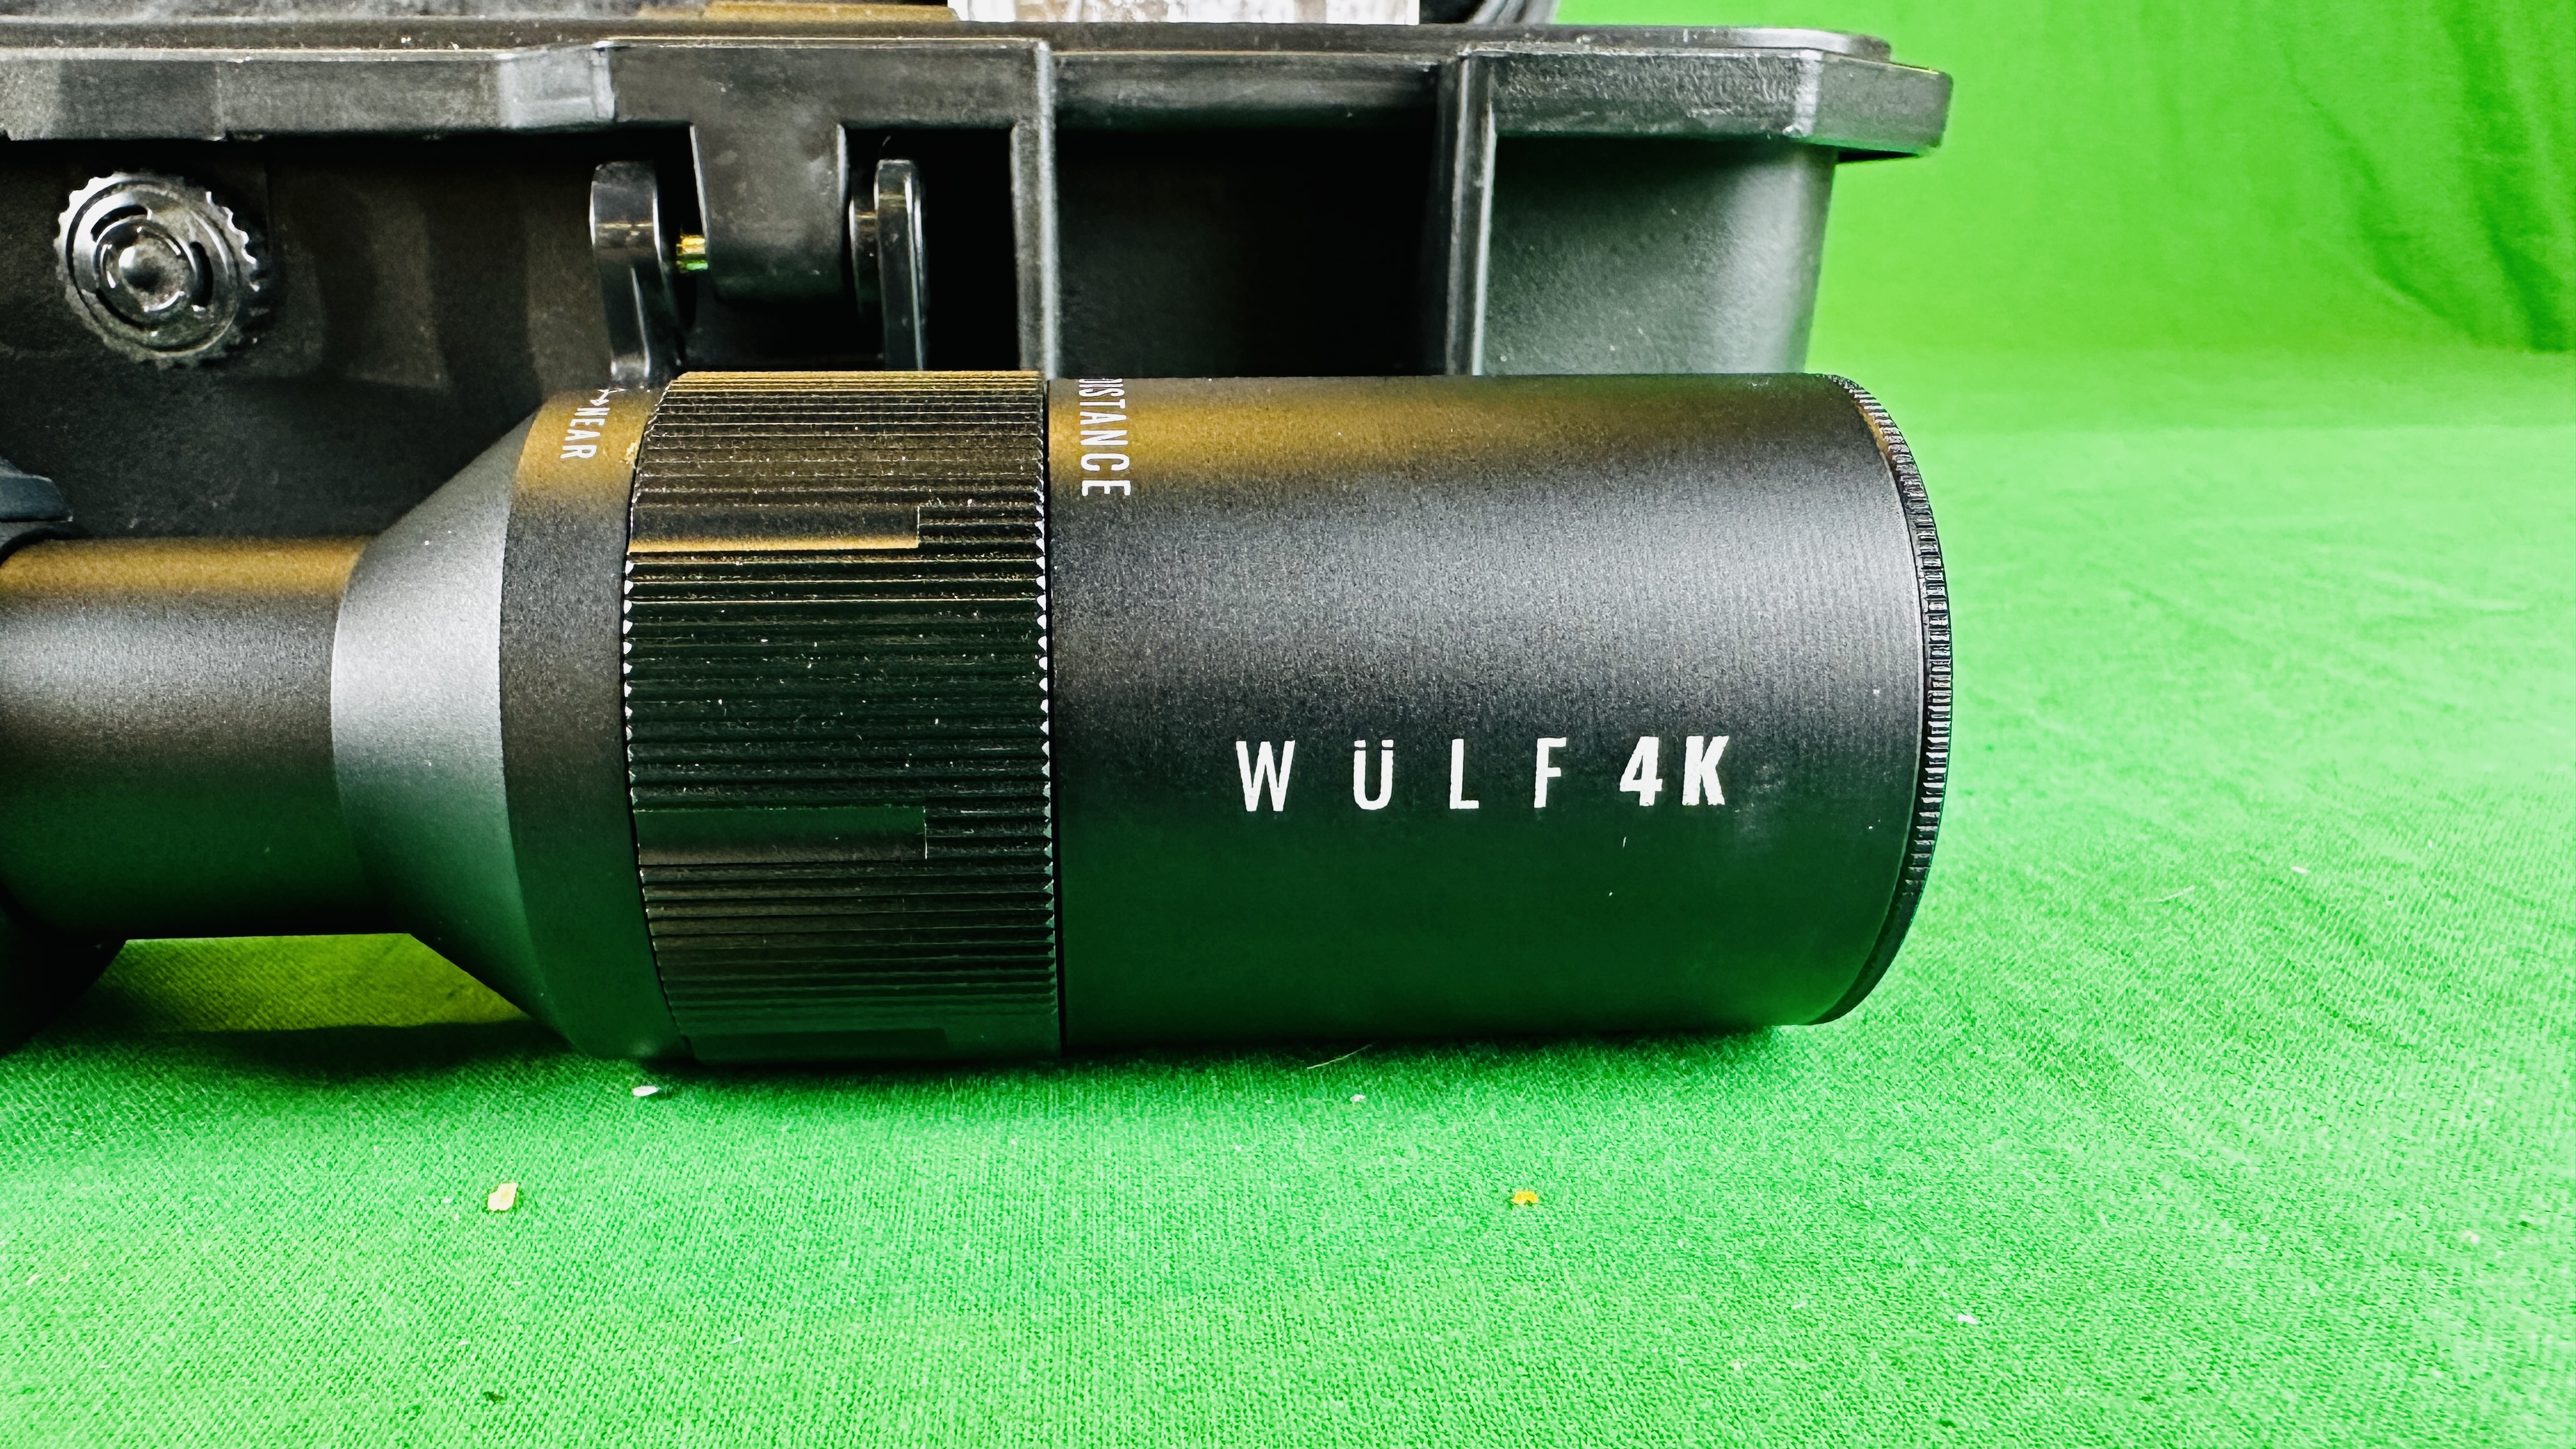 WULF 3-24X DAY/NIGHT VISION RIFLE SCOPE IN HARD SHELL CARRY CASE WITH ACCESSORIES. - Image 2 of 24